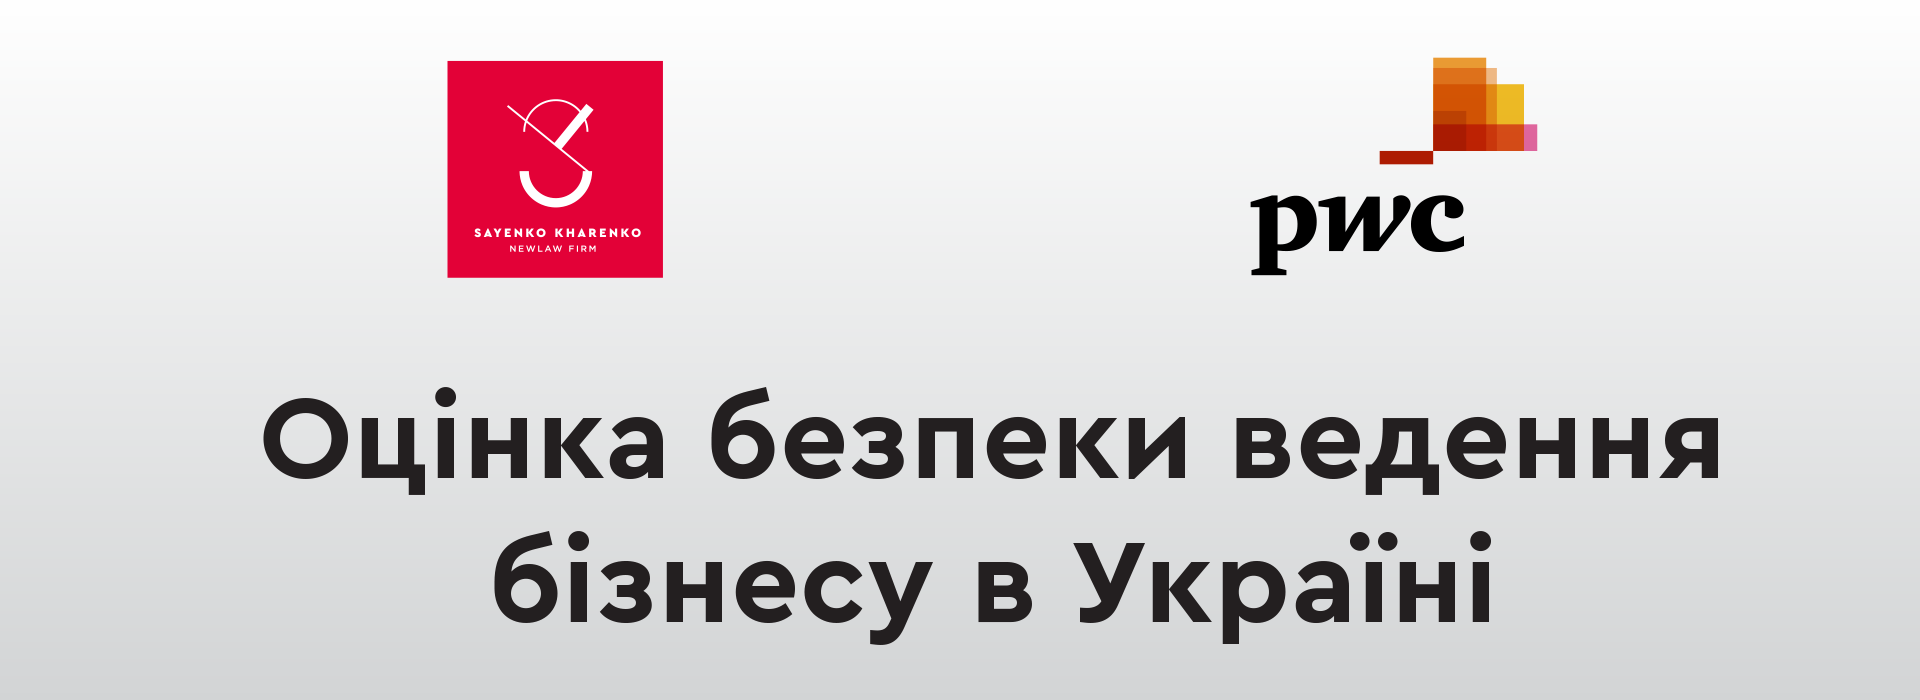 Sayenko Kharenko and PwC Ukraine Are Conducting the “Assessment of the Safety of Doing Business in Ukraine” 2.0 Survey